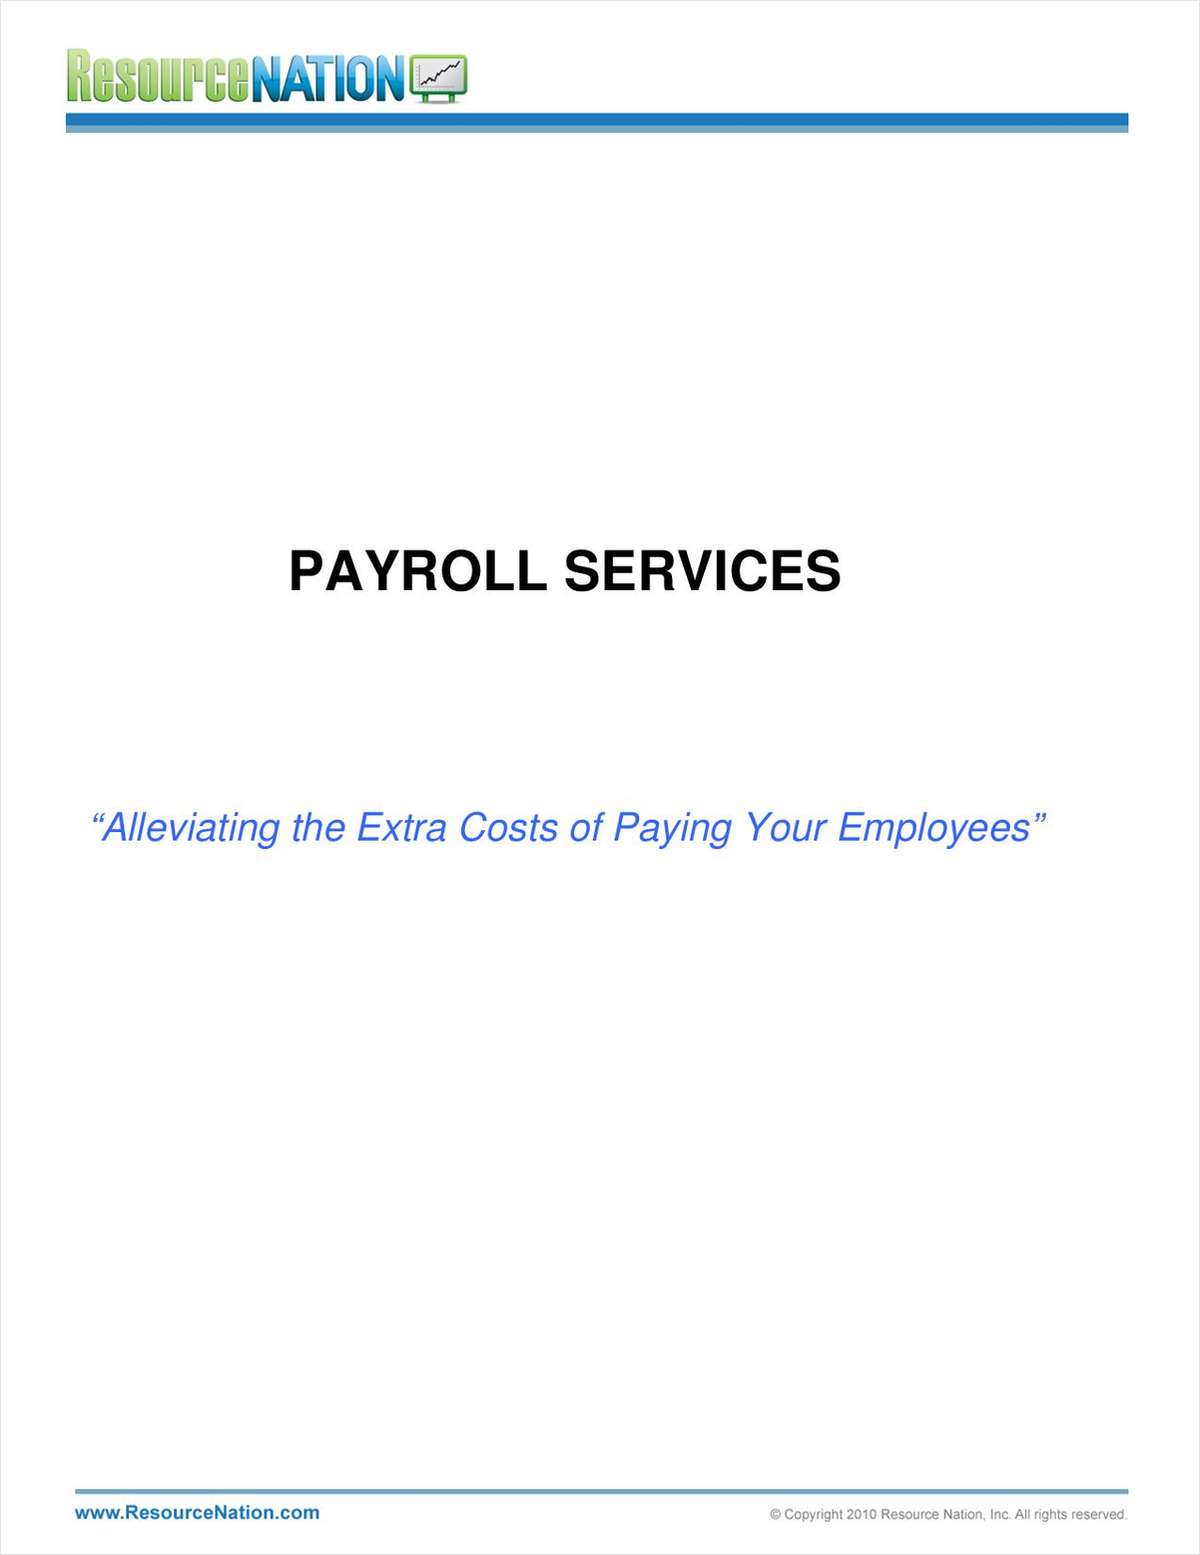 Pros & Cons of Outsourcing Your Payroll Service